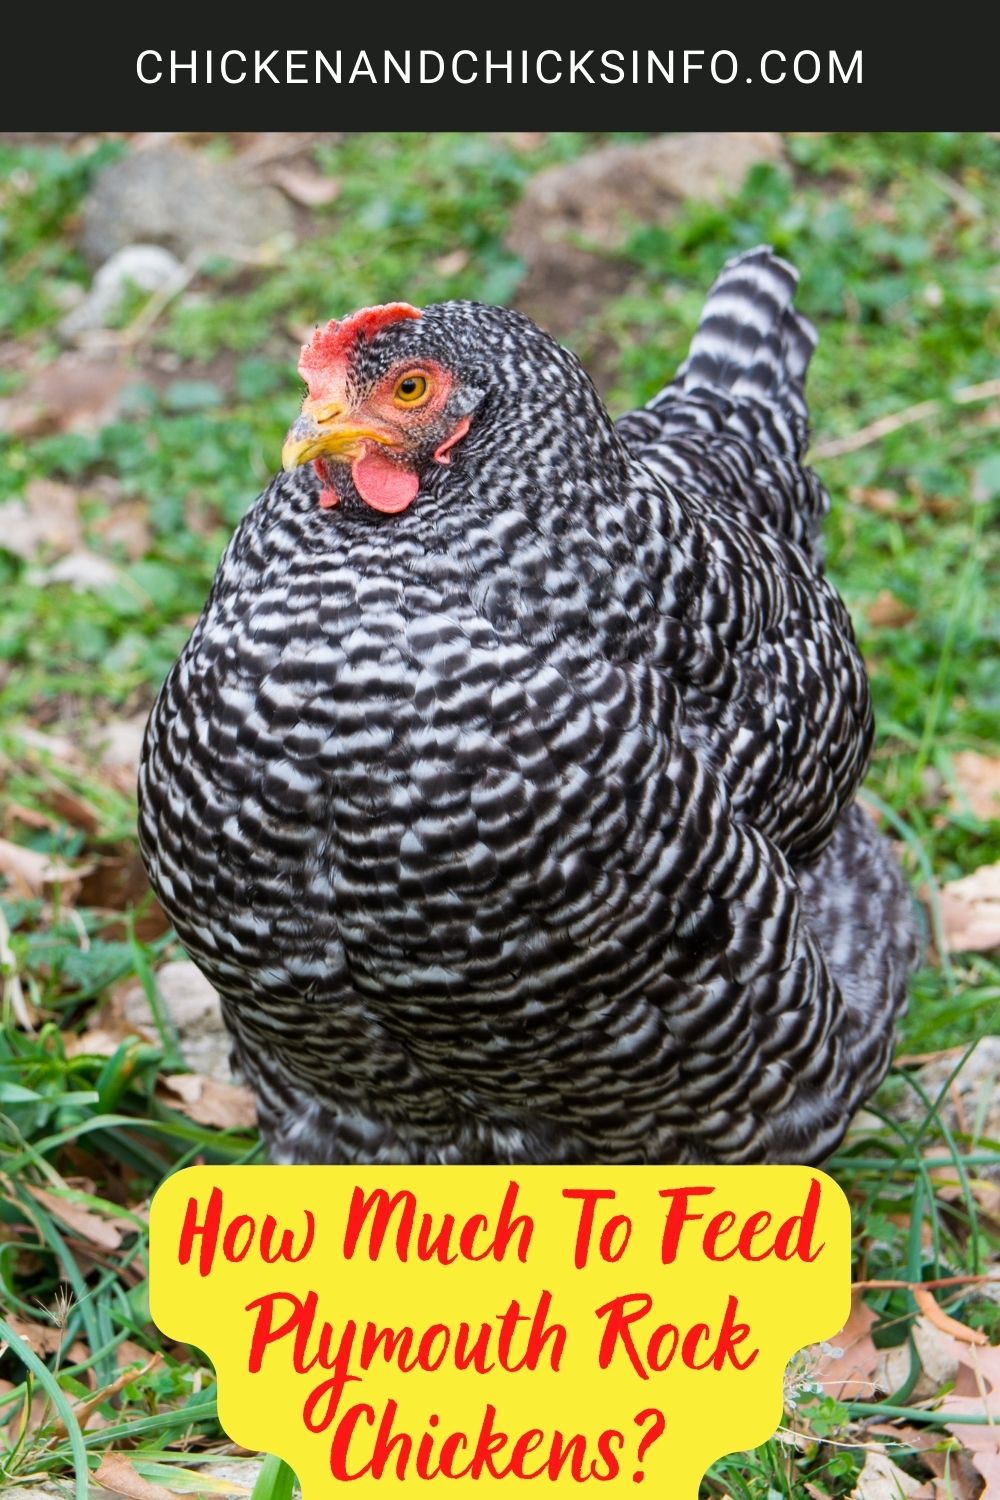 How Much To Feed Plymouth Rock Chickens? poster.
